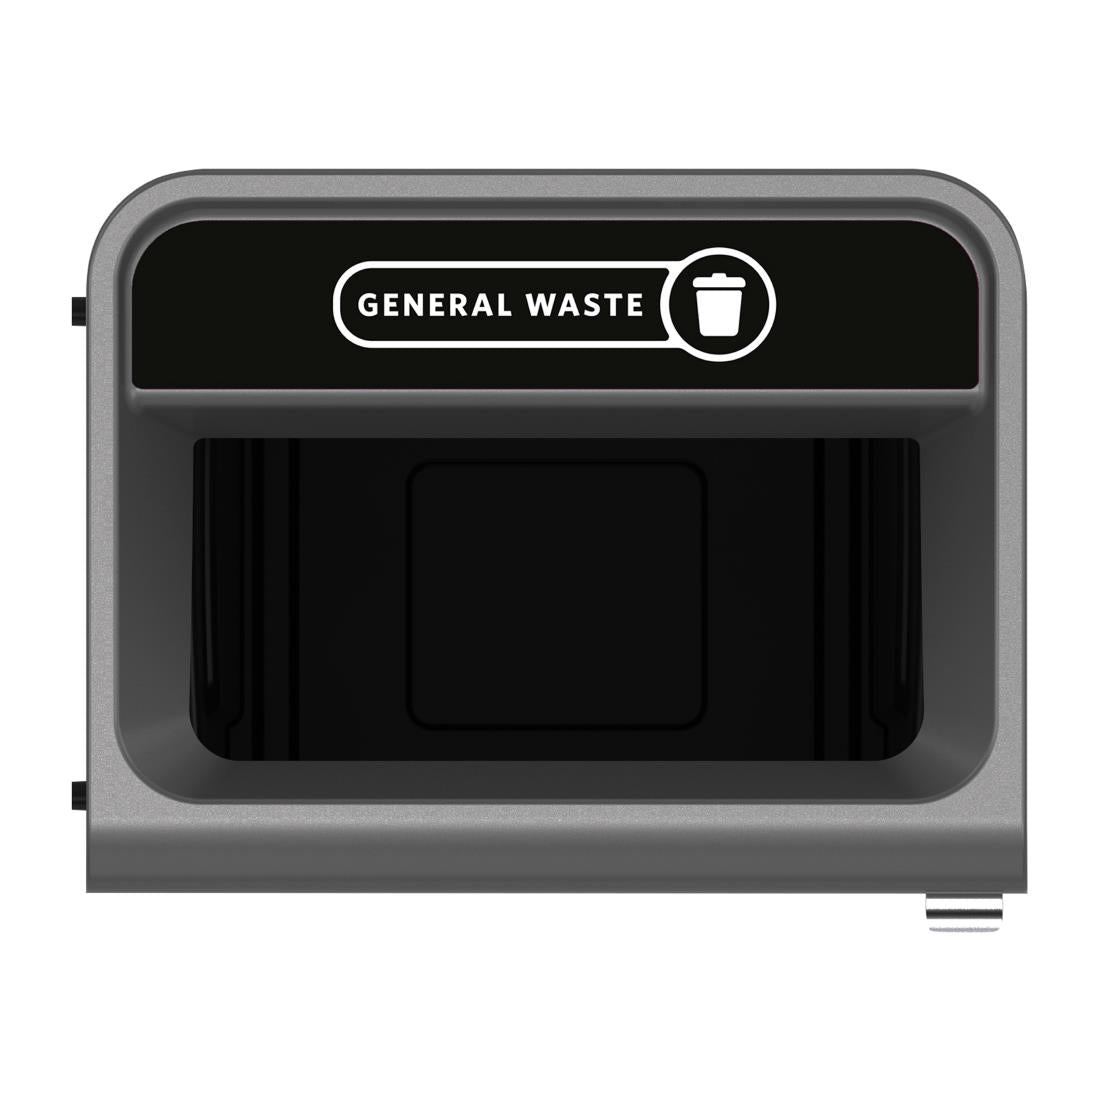 CX980 Rubbermaid Configure Recycling Bin with General Waste Label Black 125L JD Catering Equipment Solutions Ltd